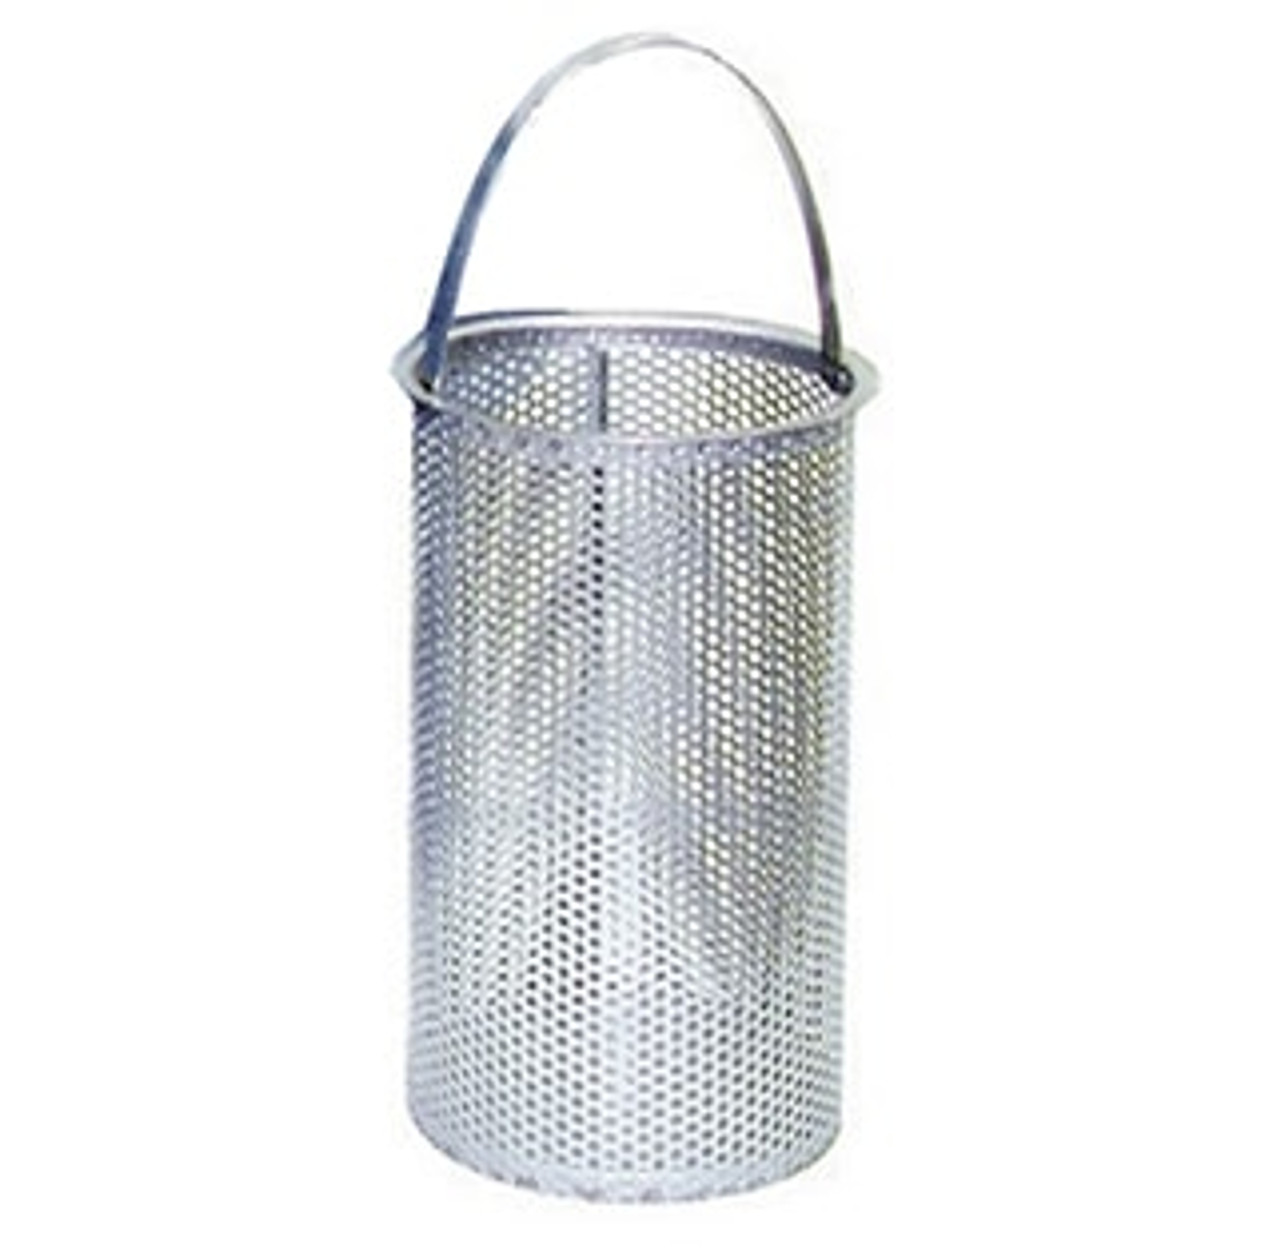 3/8" Perforated Replacement Basket for Eaton Model 72 Strainer Size 2-1/2"